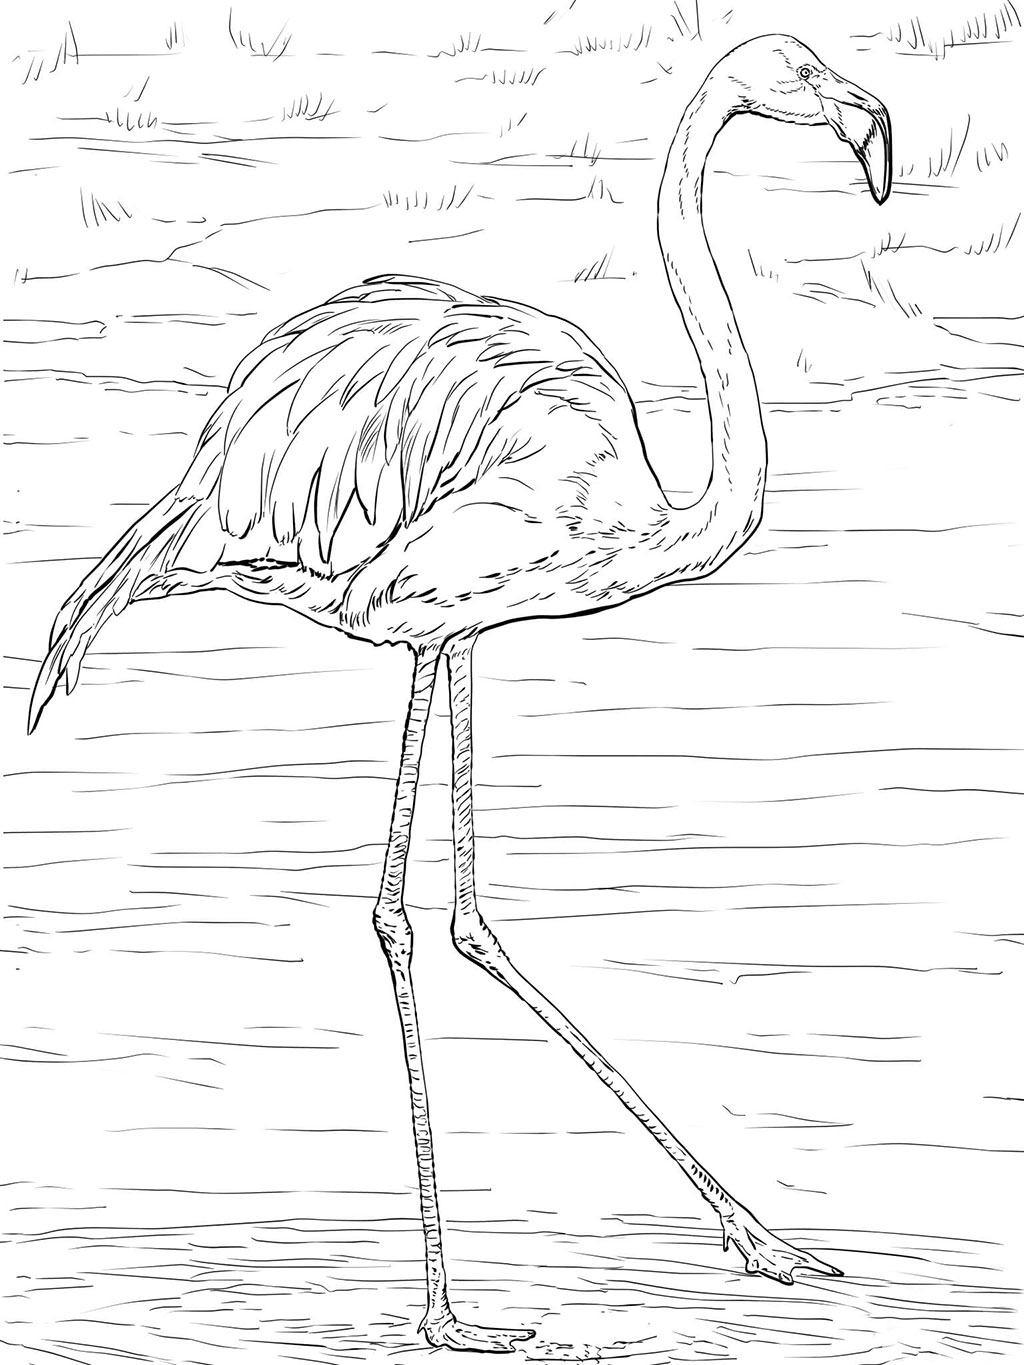 flamingo-coloring-pages-best-coloring-pages-for-kids